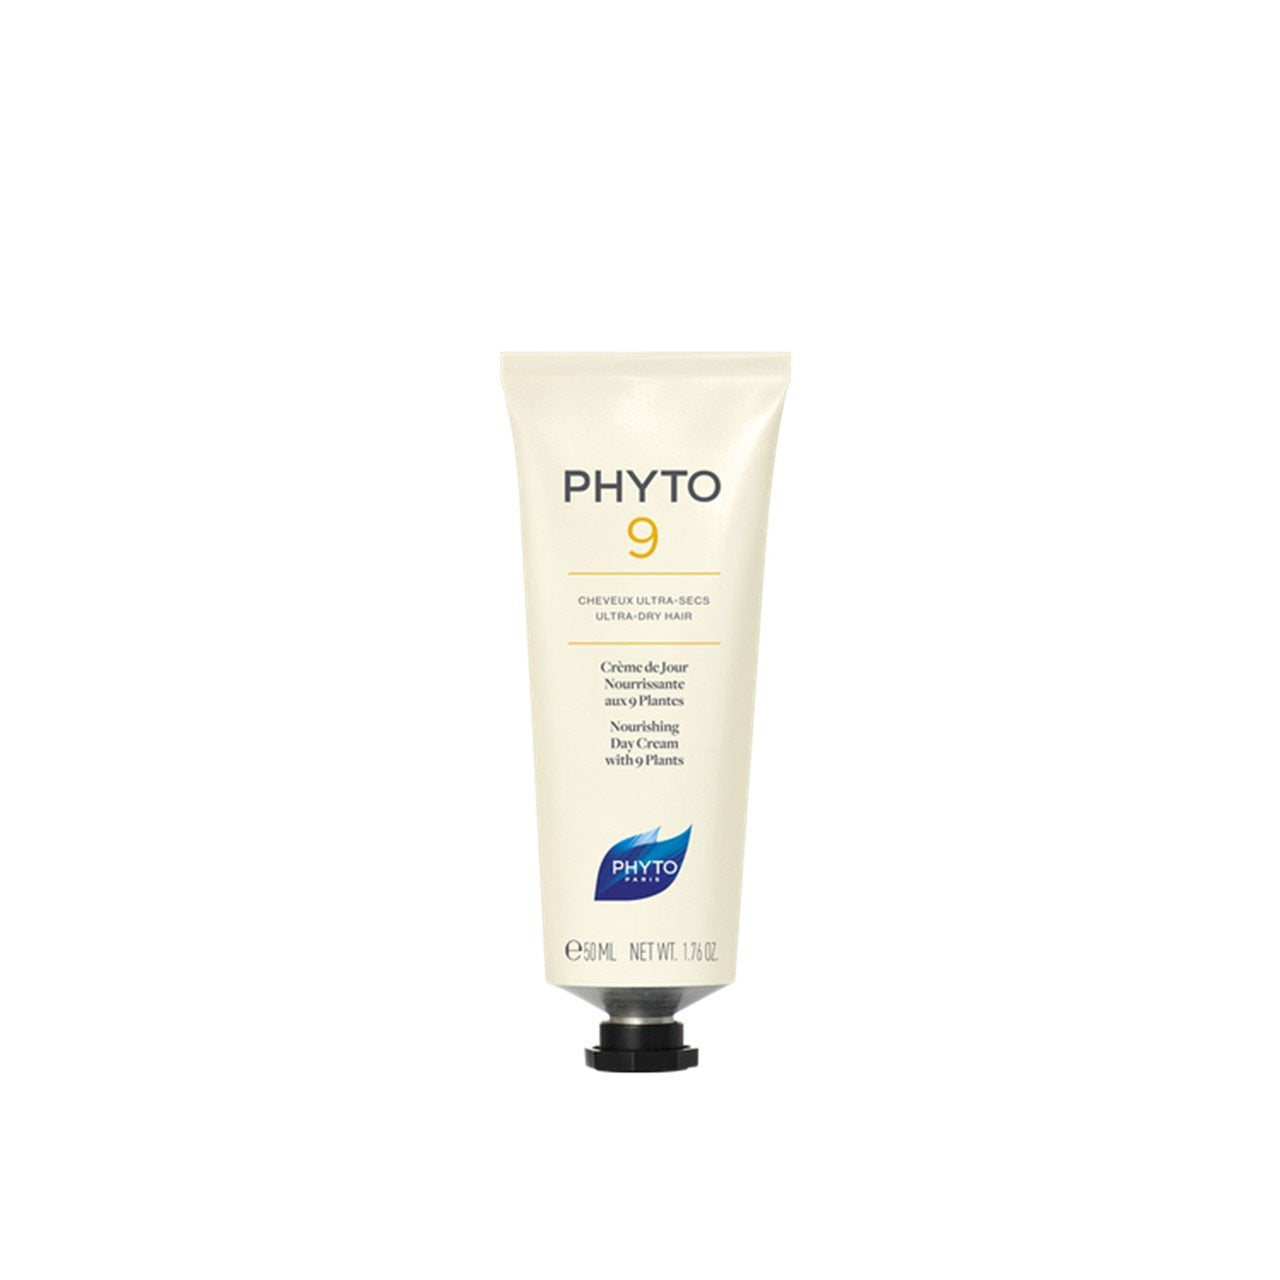 Phyto 9 Care for Ultra-Dry Hair 50ml